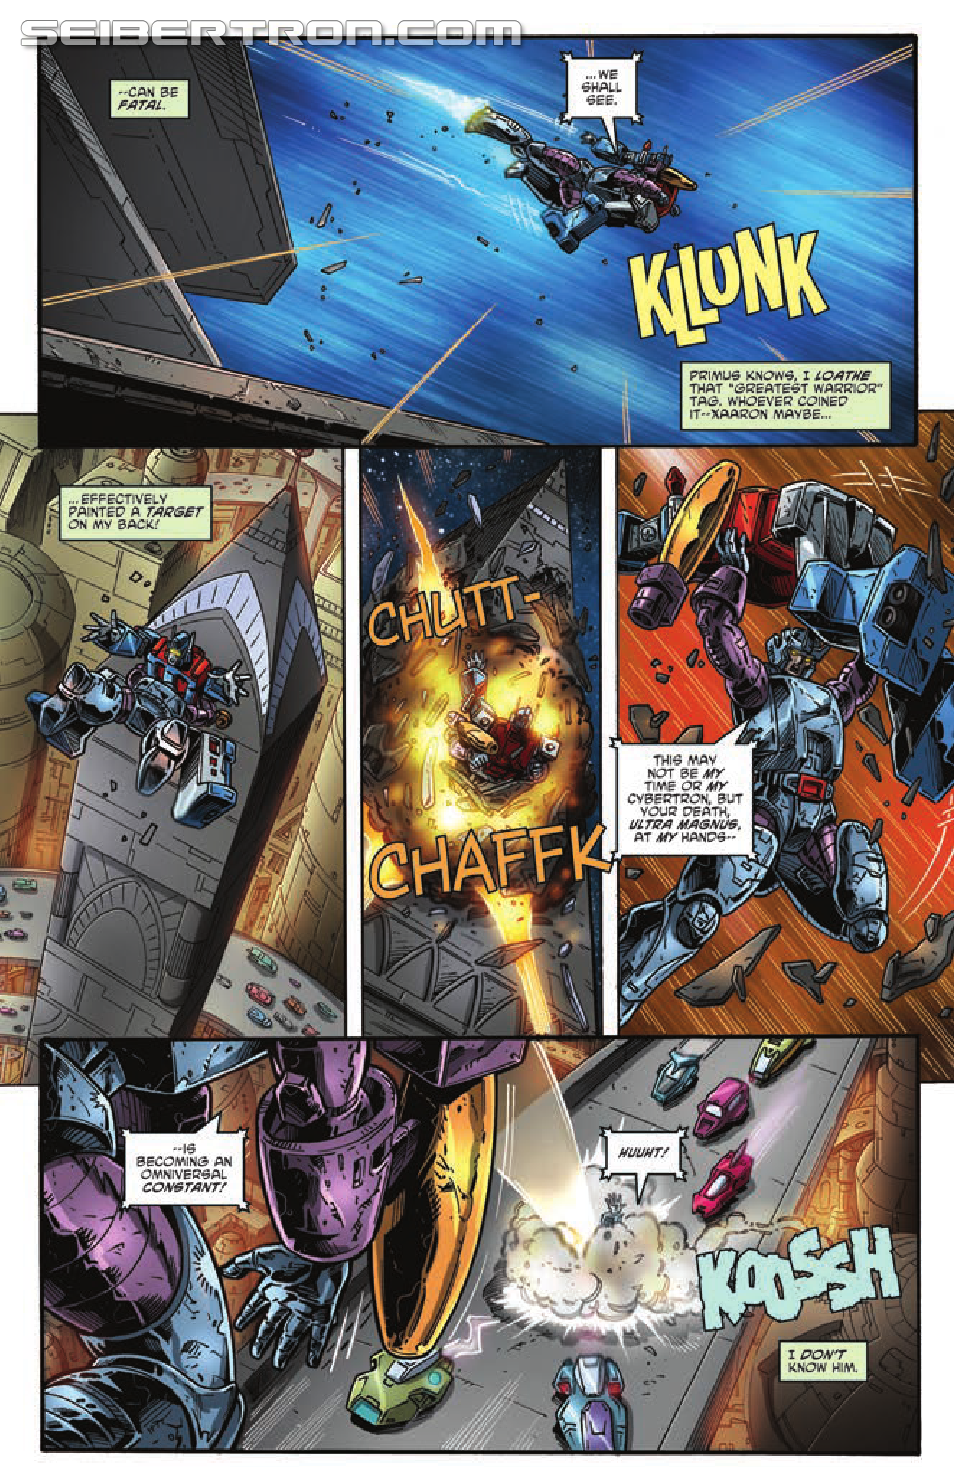 Transformers: Regeneration One #94 Preview